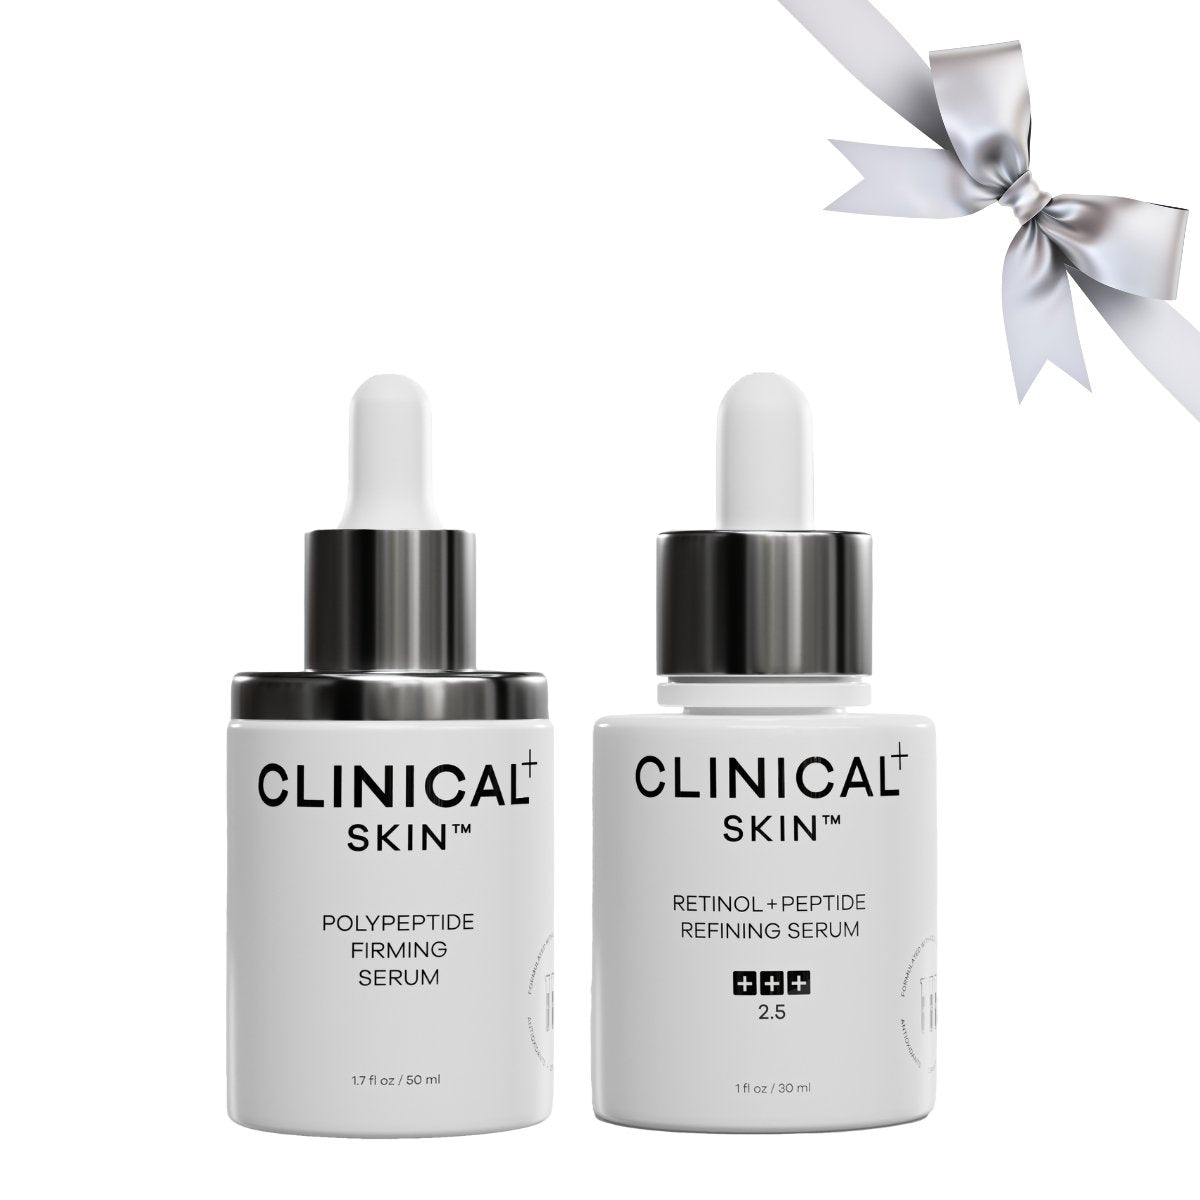 Clinical Skin Advanced Skin Firming and Refining Duo - SkincareEssentials